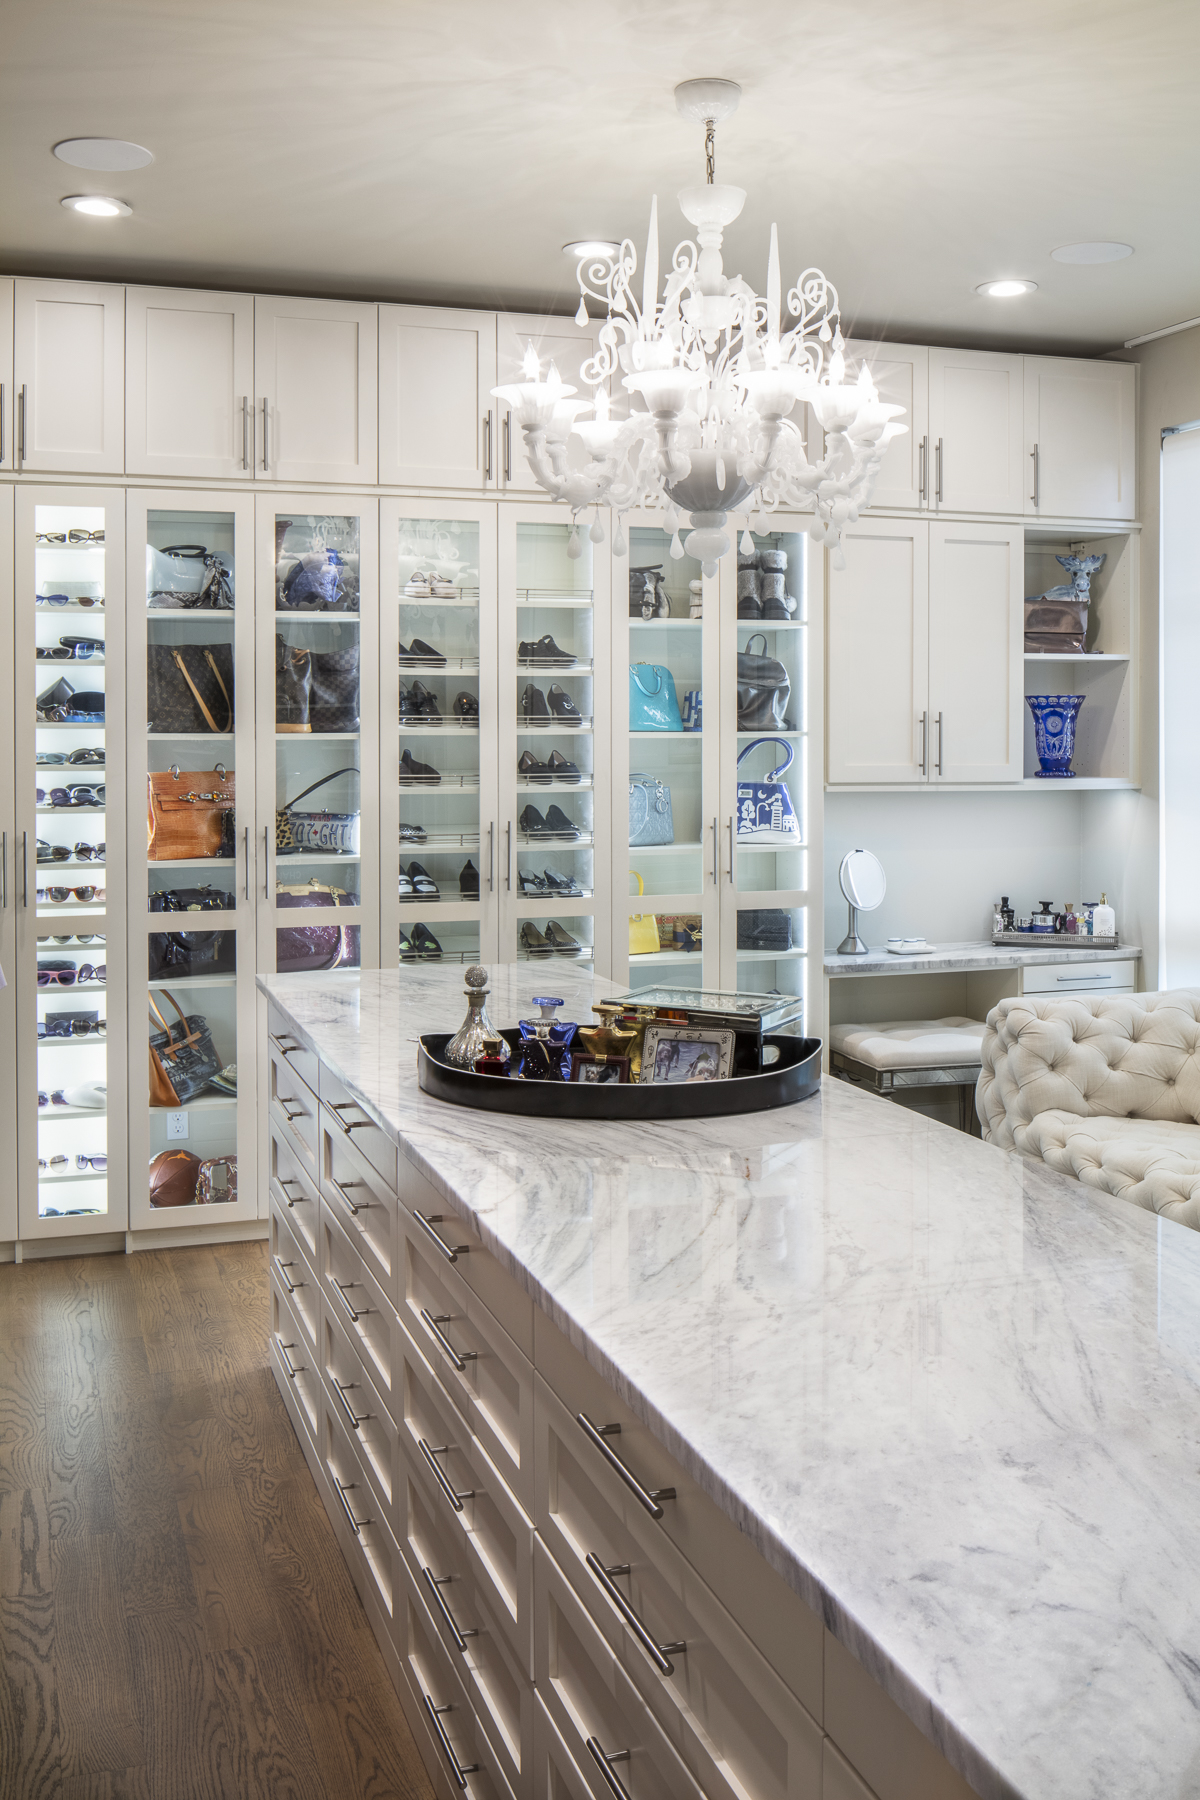 More Space Place can show you the advantages of a custom designed closet or storage solution. Our custom closet home systems are fully adjustable and include accessories and lighting to enhance the look and function of your space. Contact a More Space Place designer to transform your closet today.